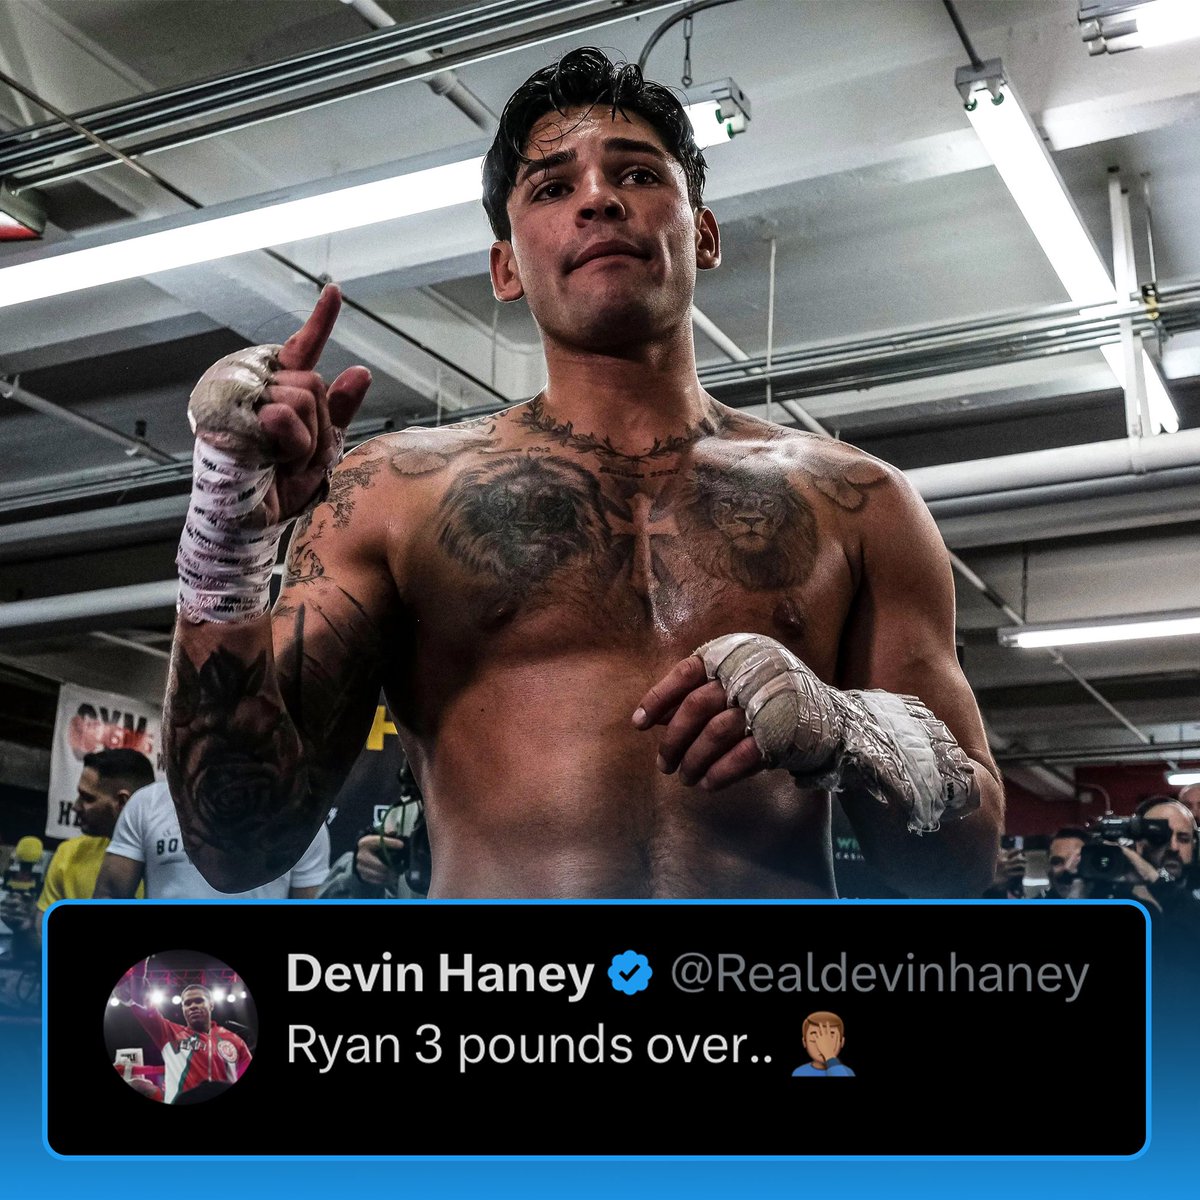 He didnt want to cut the hardest pounds...the last ones..the ones that require you to drain... Unprofessional for a 'king' I hope Haney knocks him out!